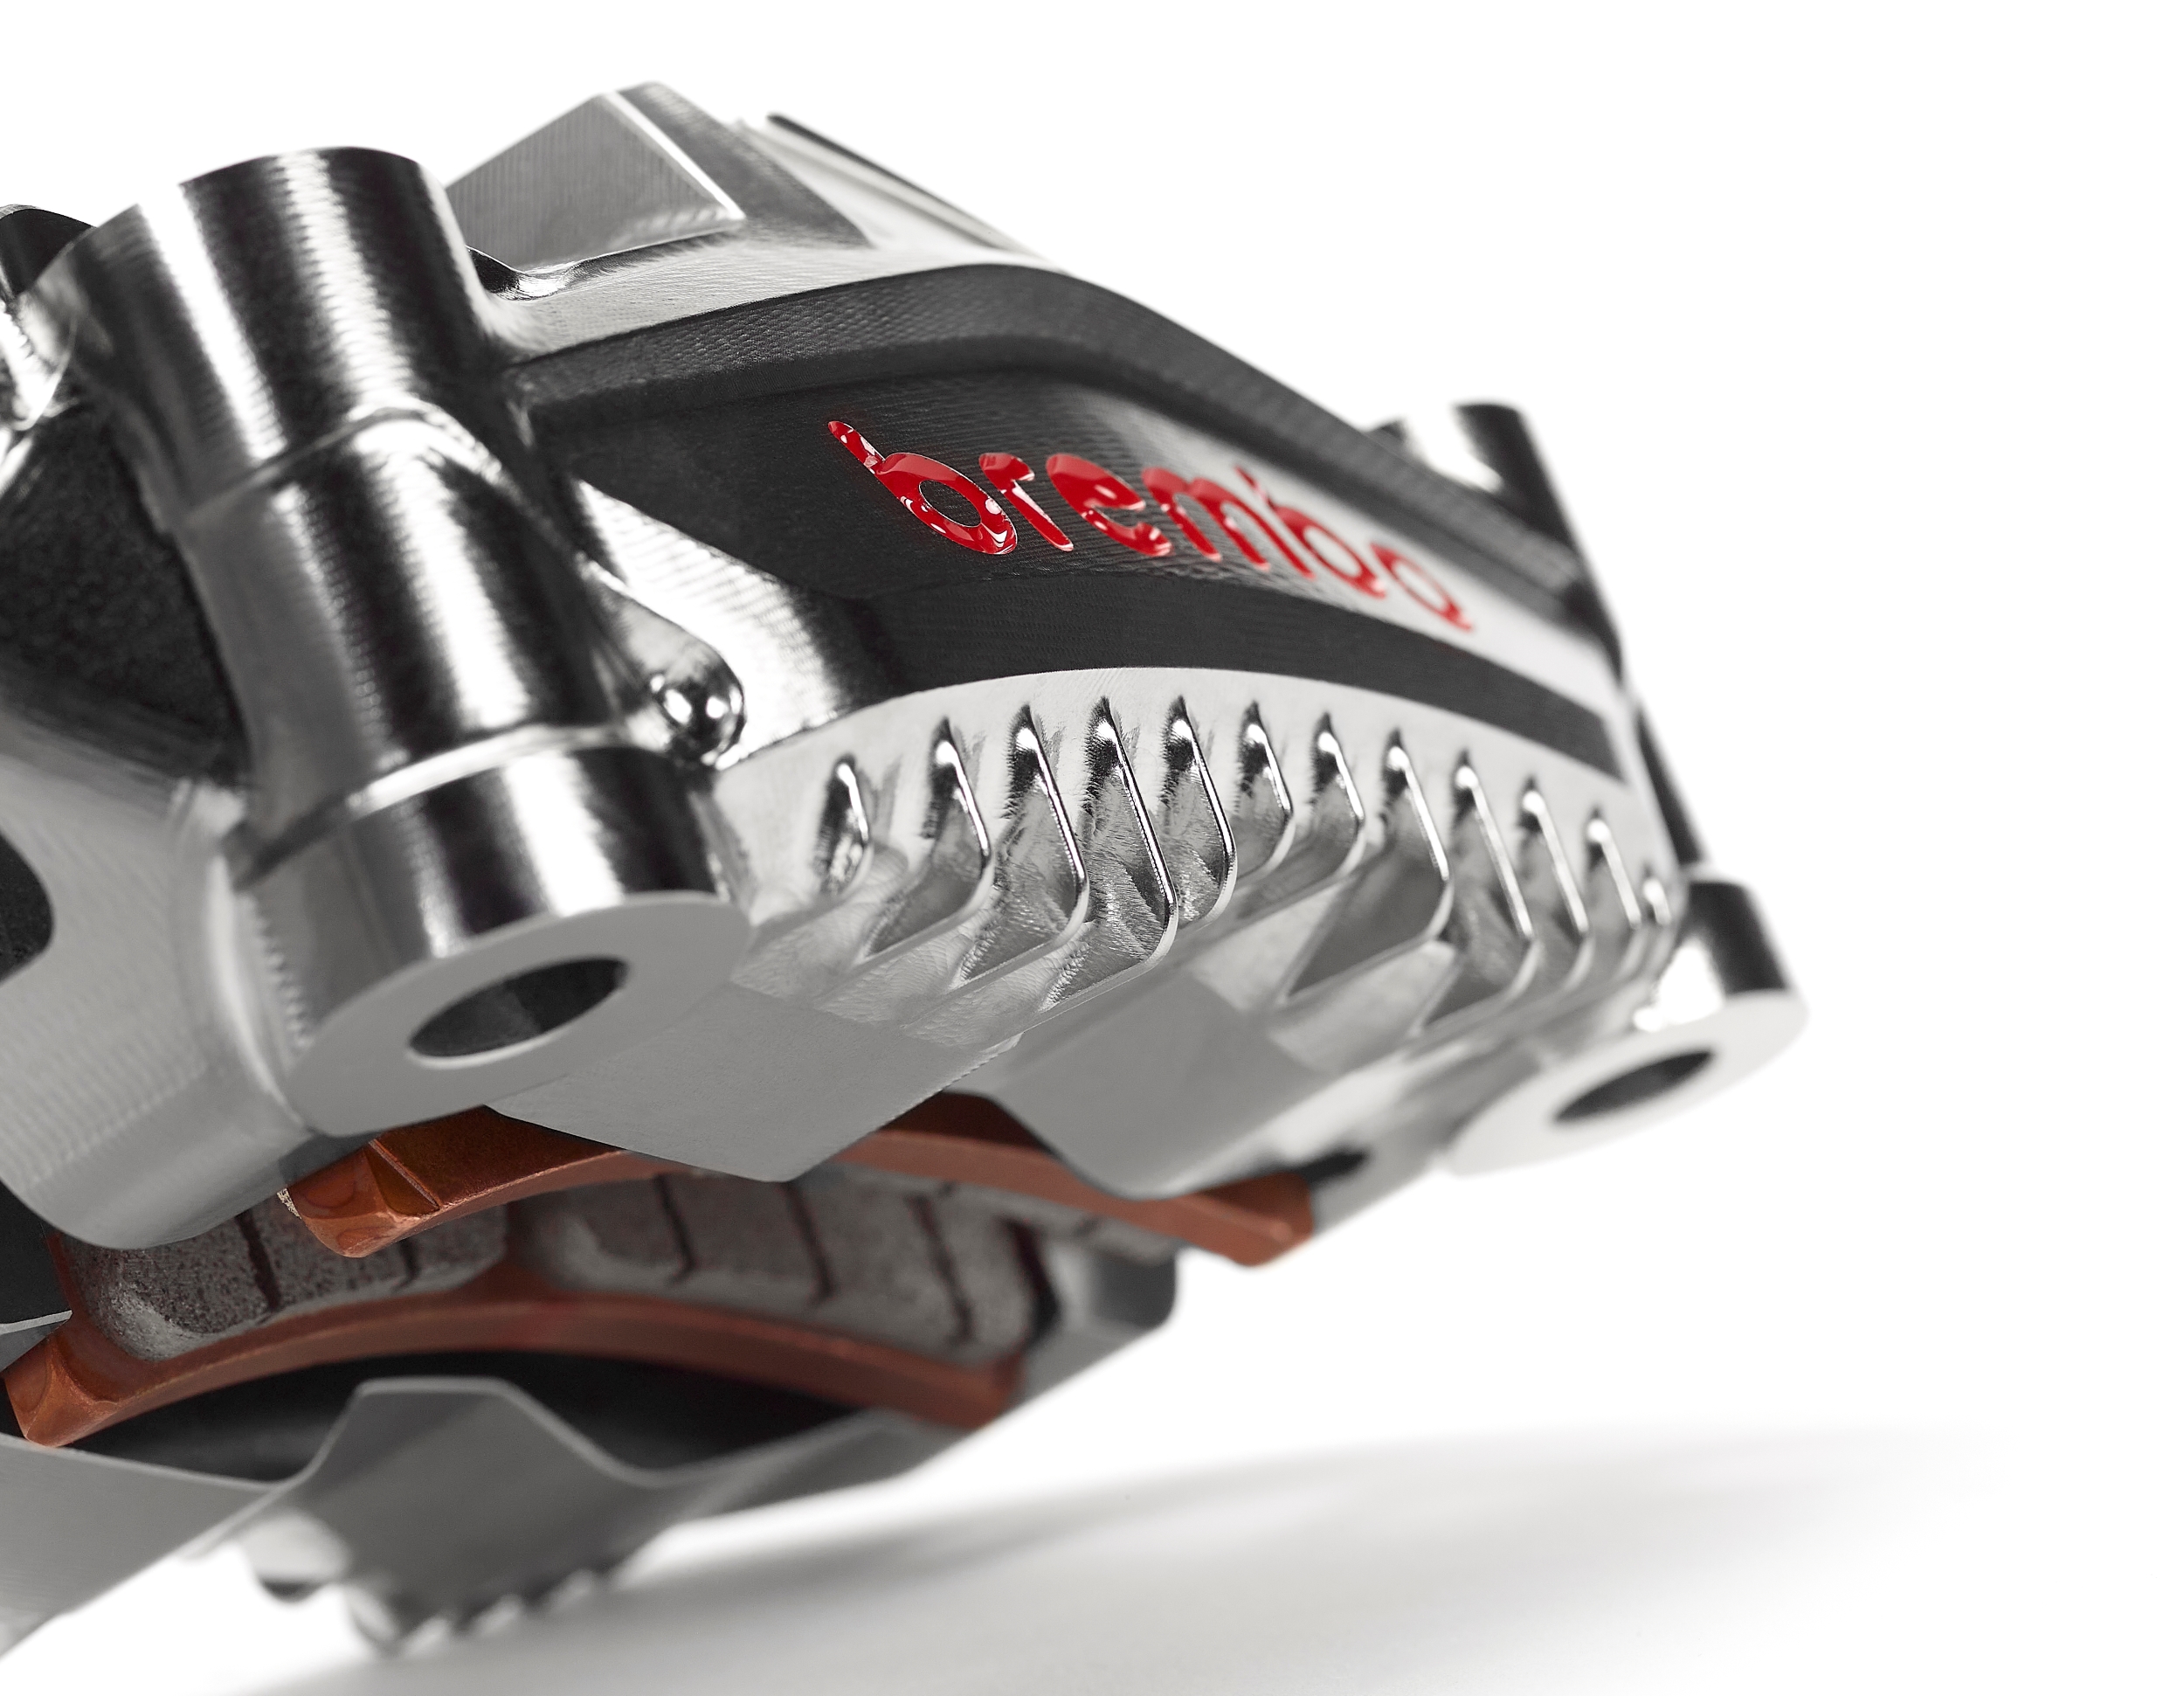 Brembo unveils the GP4-MotoGP caliper: the closest to champions